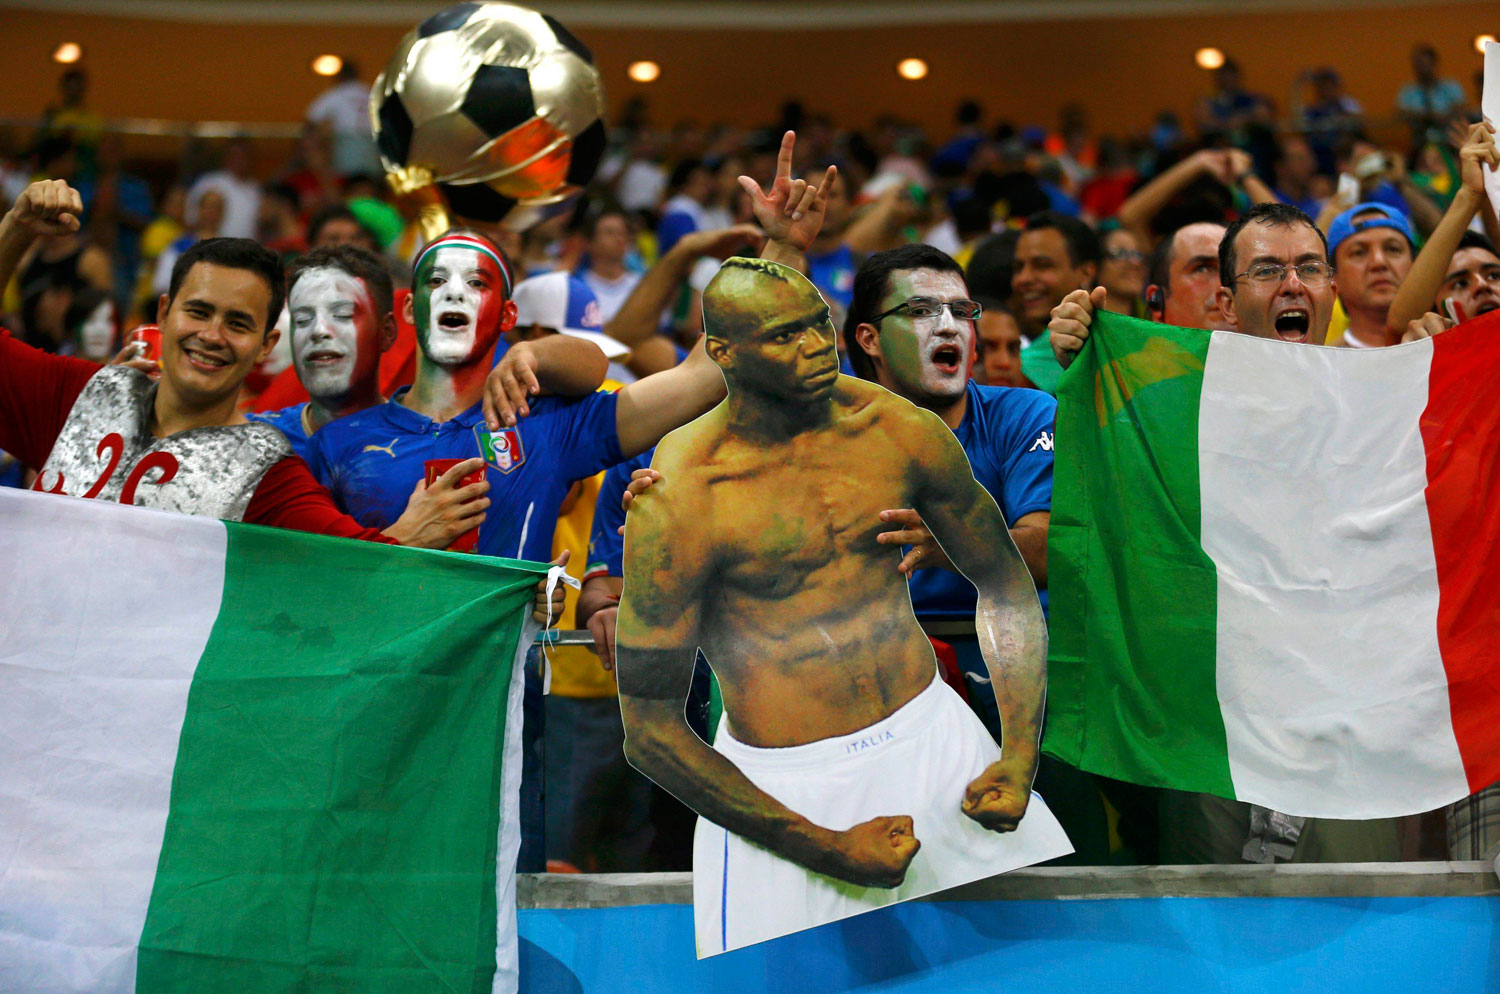 Italy fans hold a cutout of Italy's Mario Balotelli during the match between England and Italy at the Amazonia arena in Manaus, Brazil on June 14, 2014.